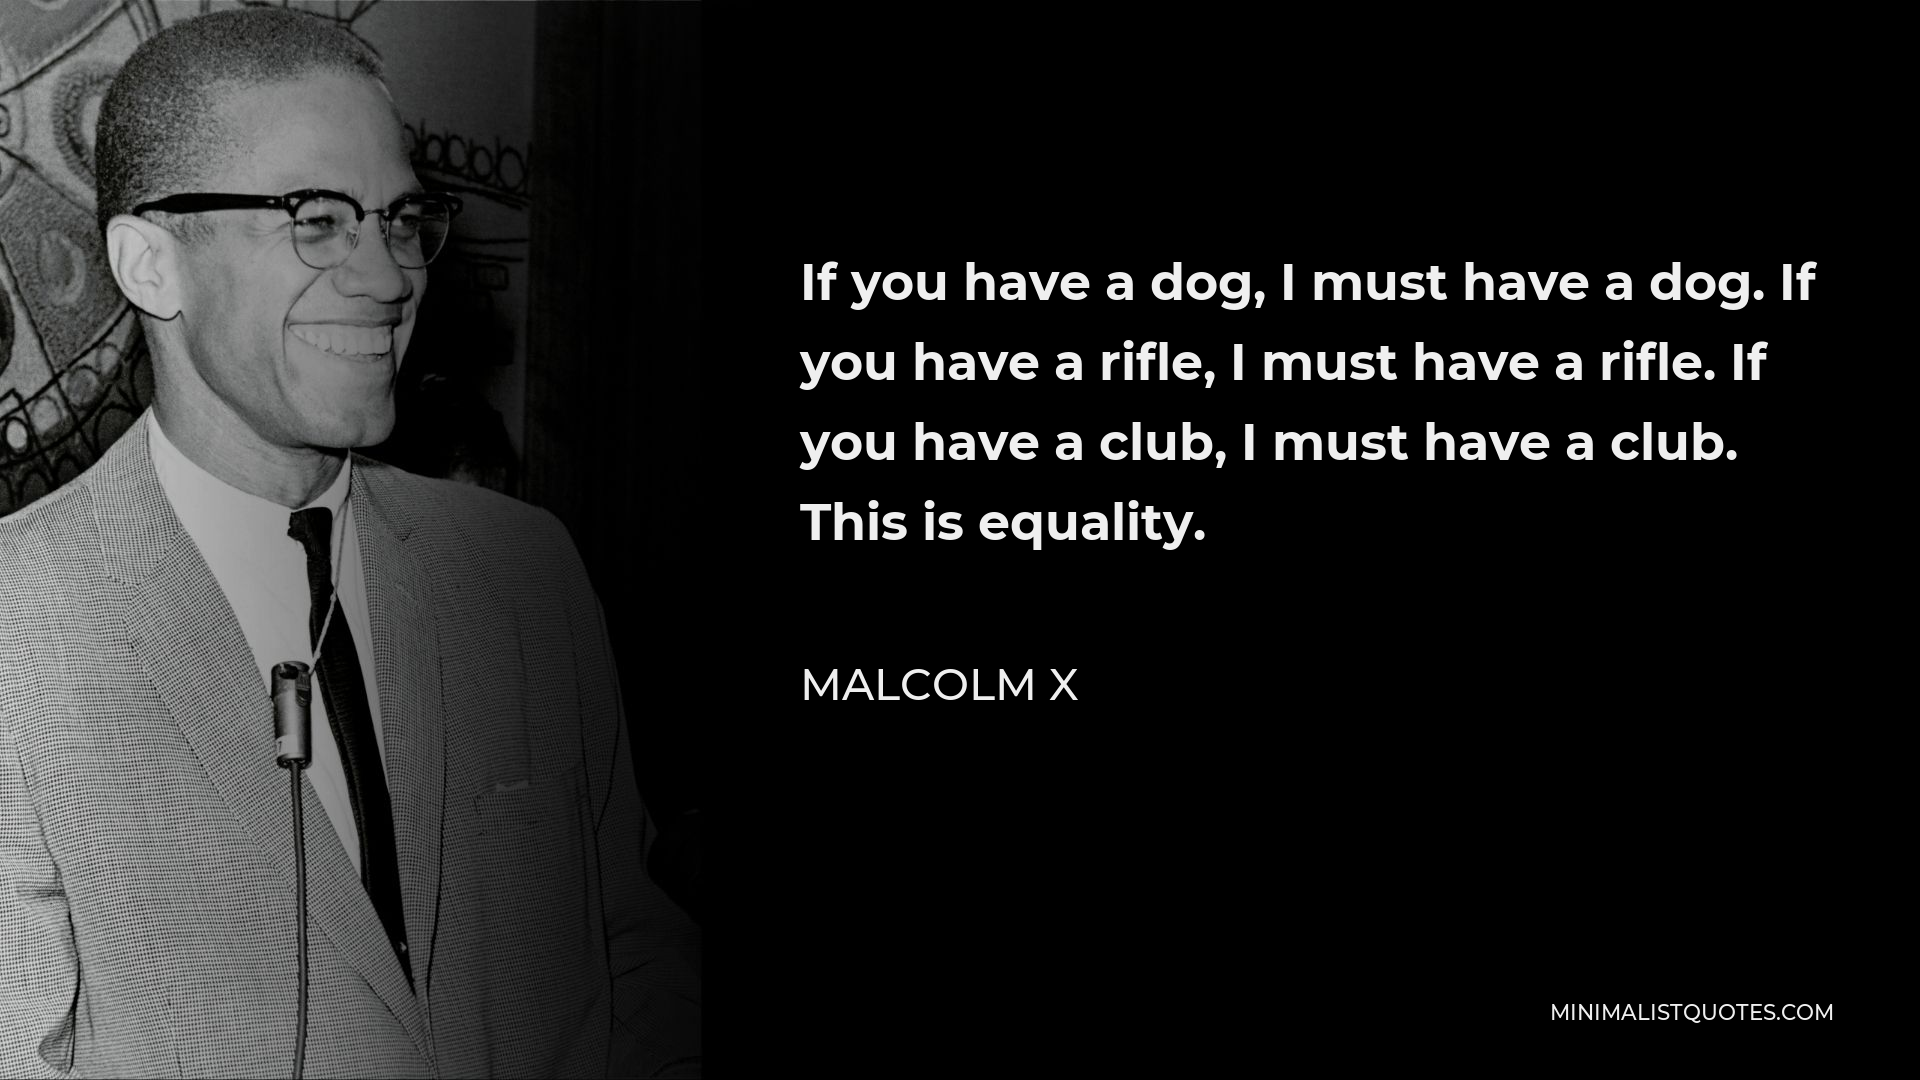 Malcolm X Quote - If you have a dog, I must have a dog. If you have a rifle, I must have a rifle. If you have a club, I must have a club. This is equality.